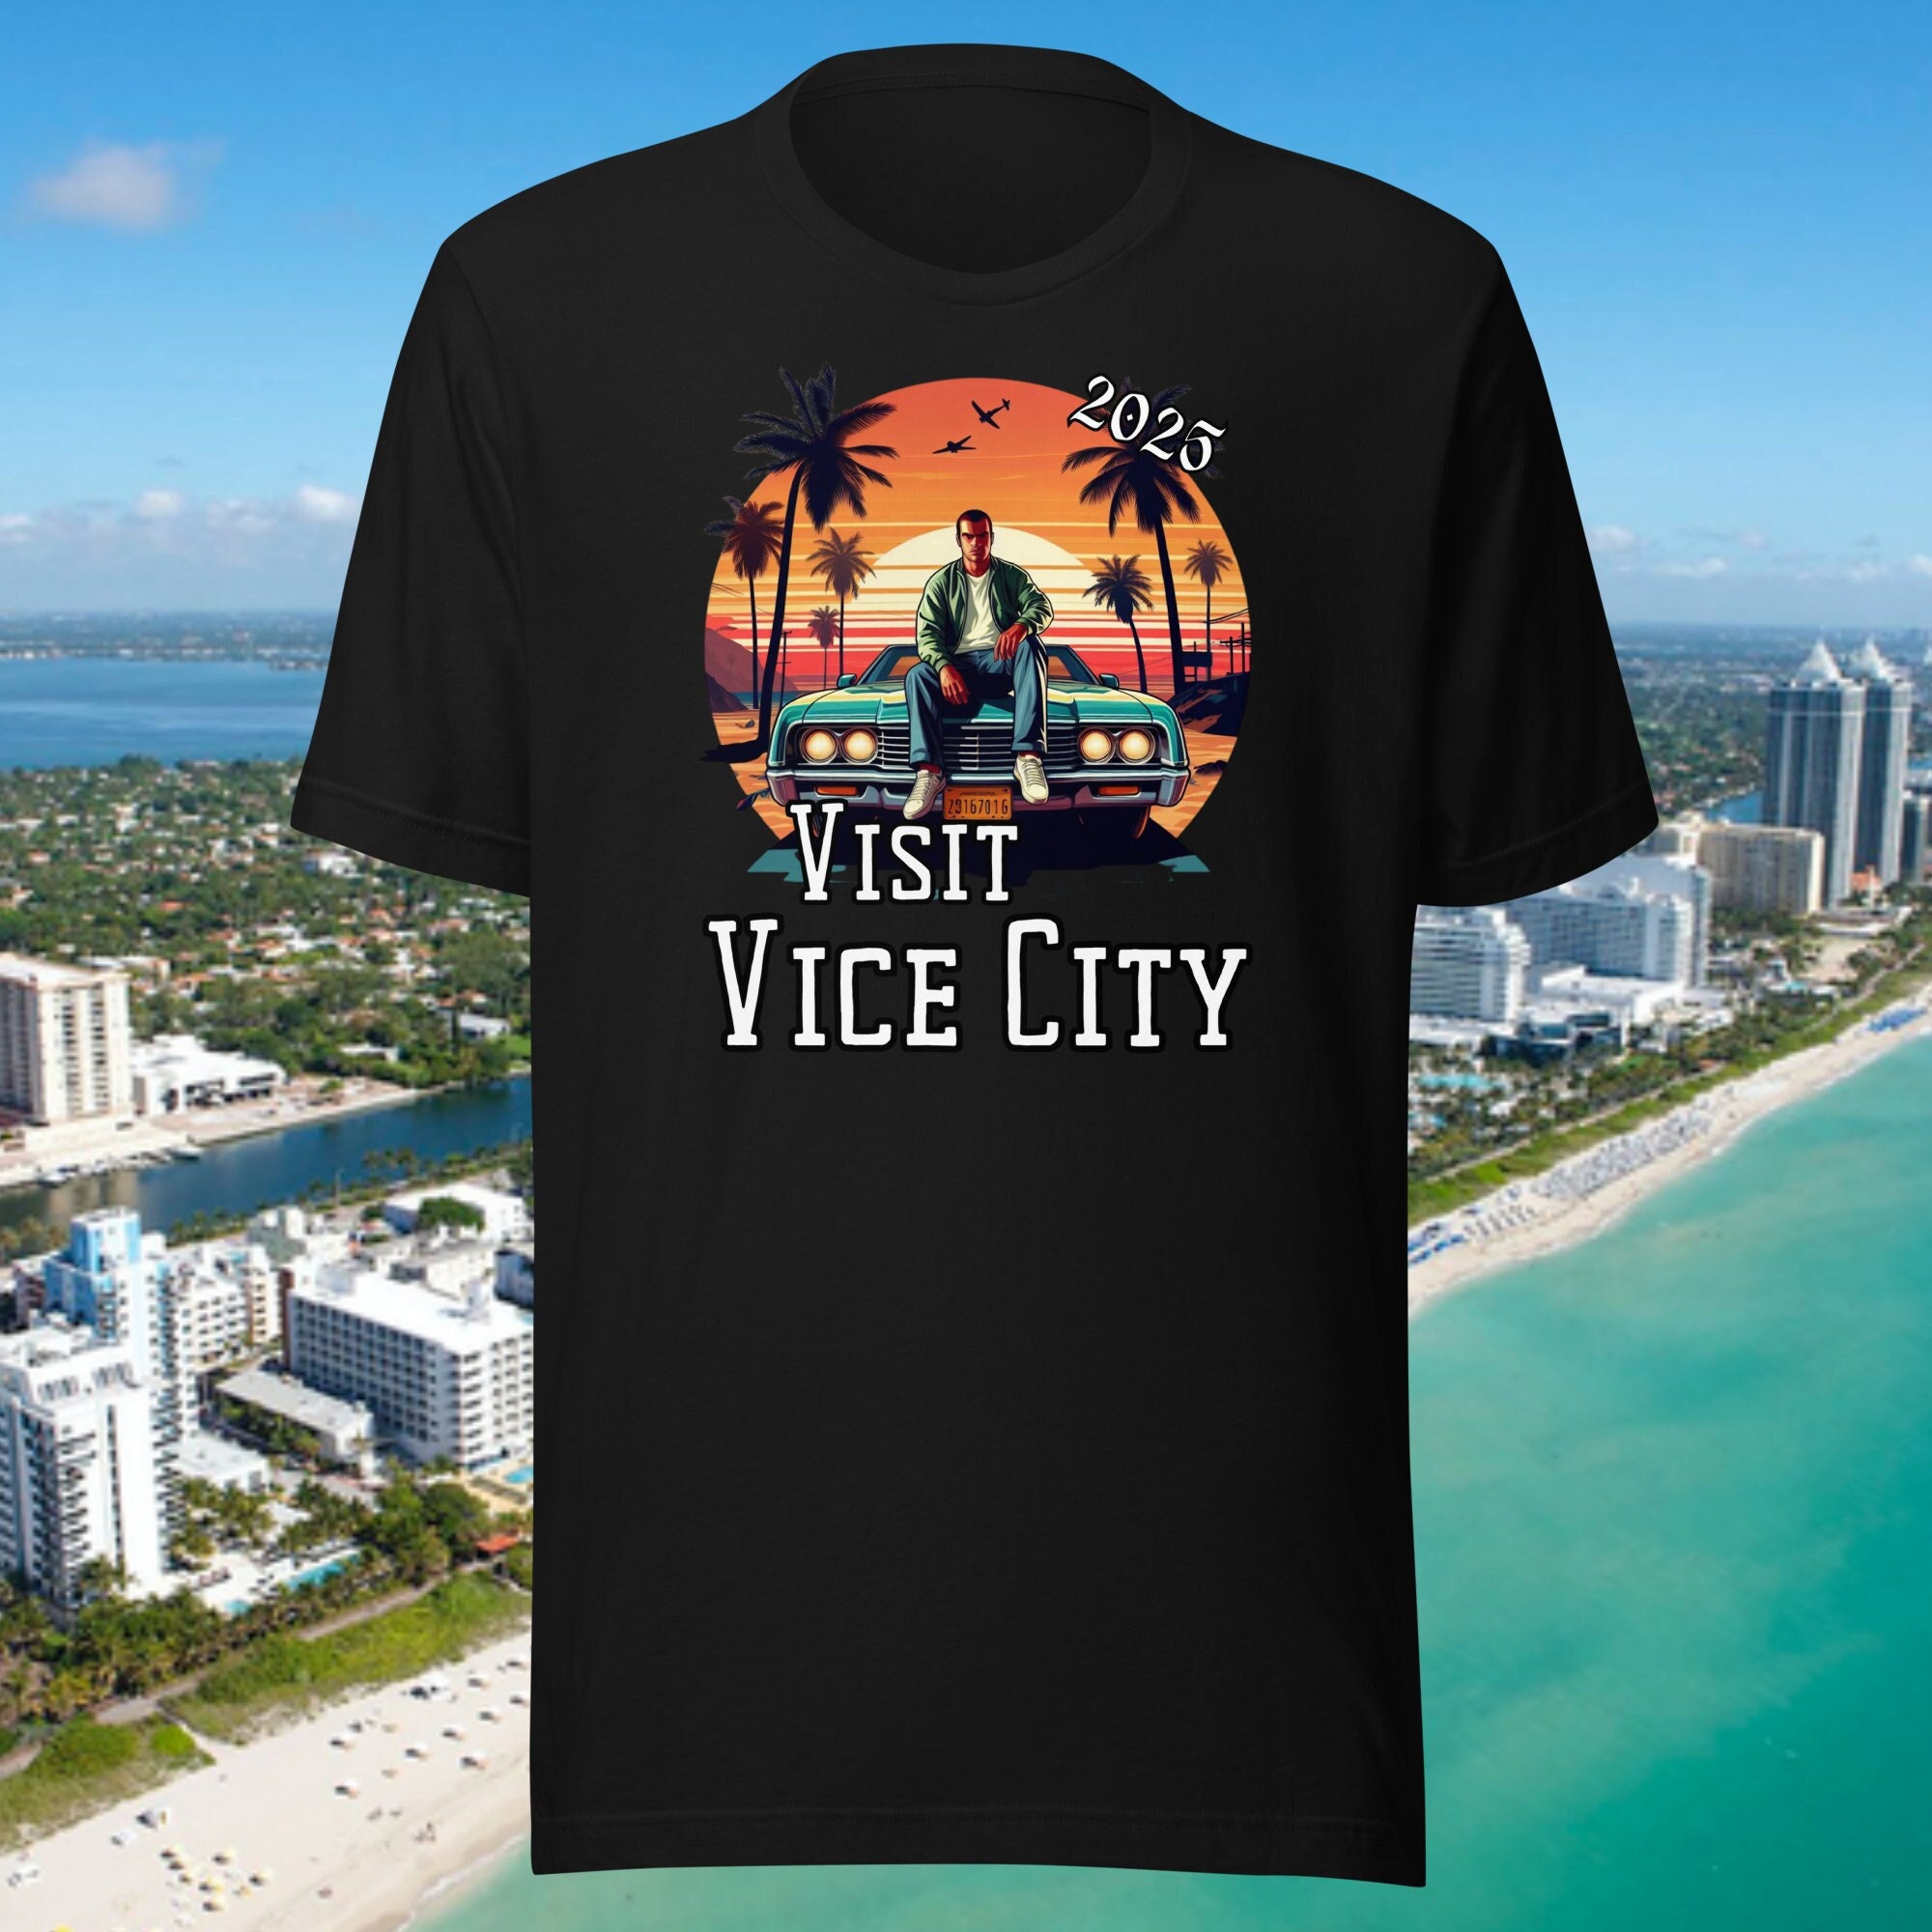 Grand Theft Auto Vice City Shirt, Vice City Game Shirt Poster for Sale by  laurimorro7